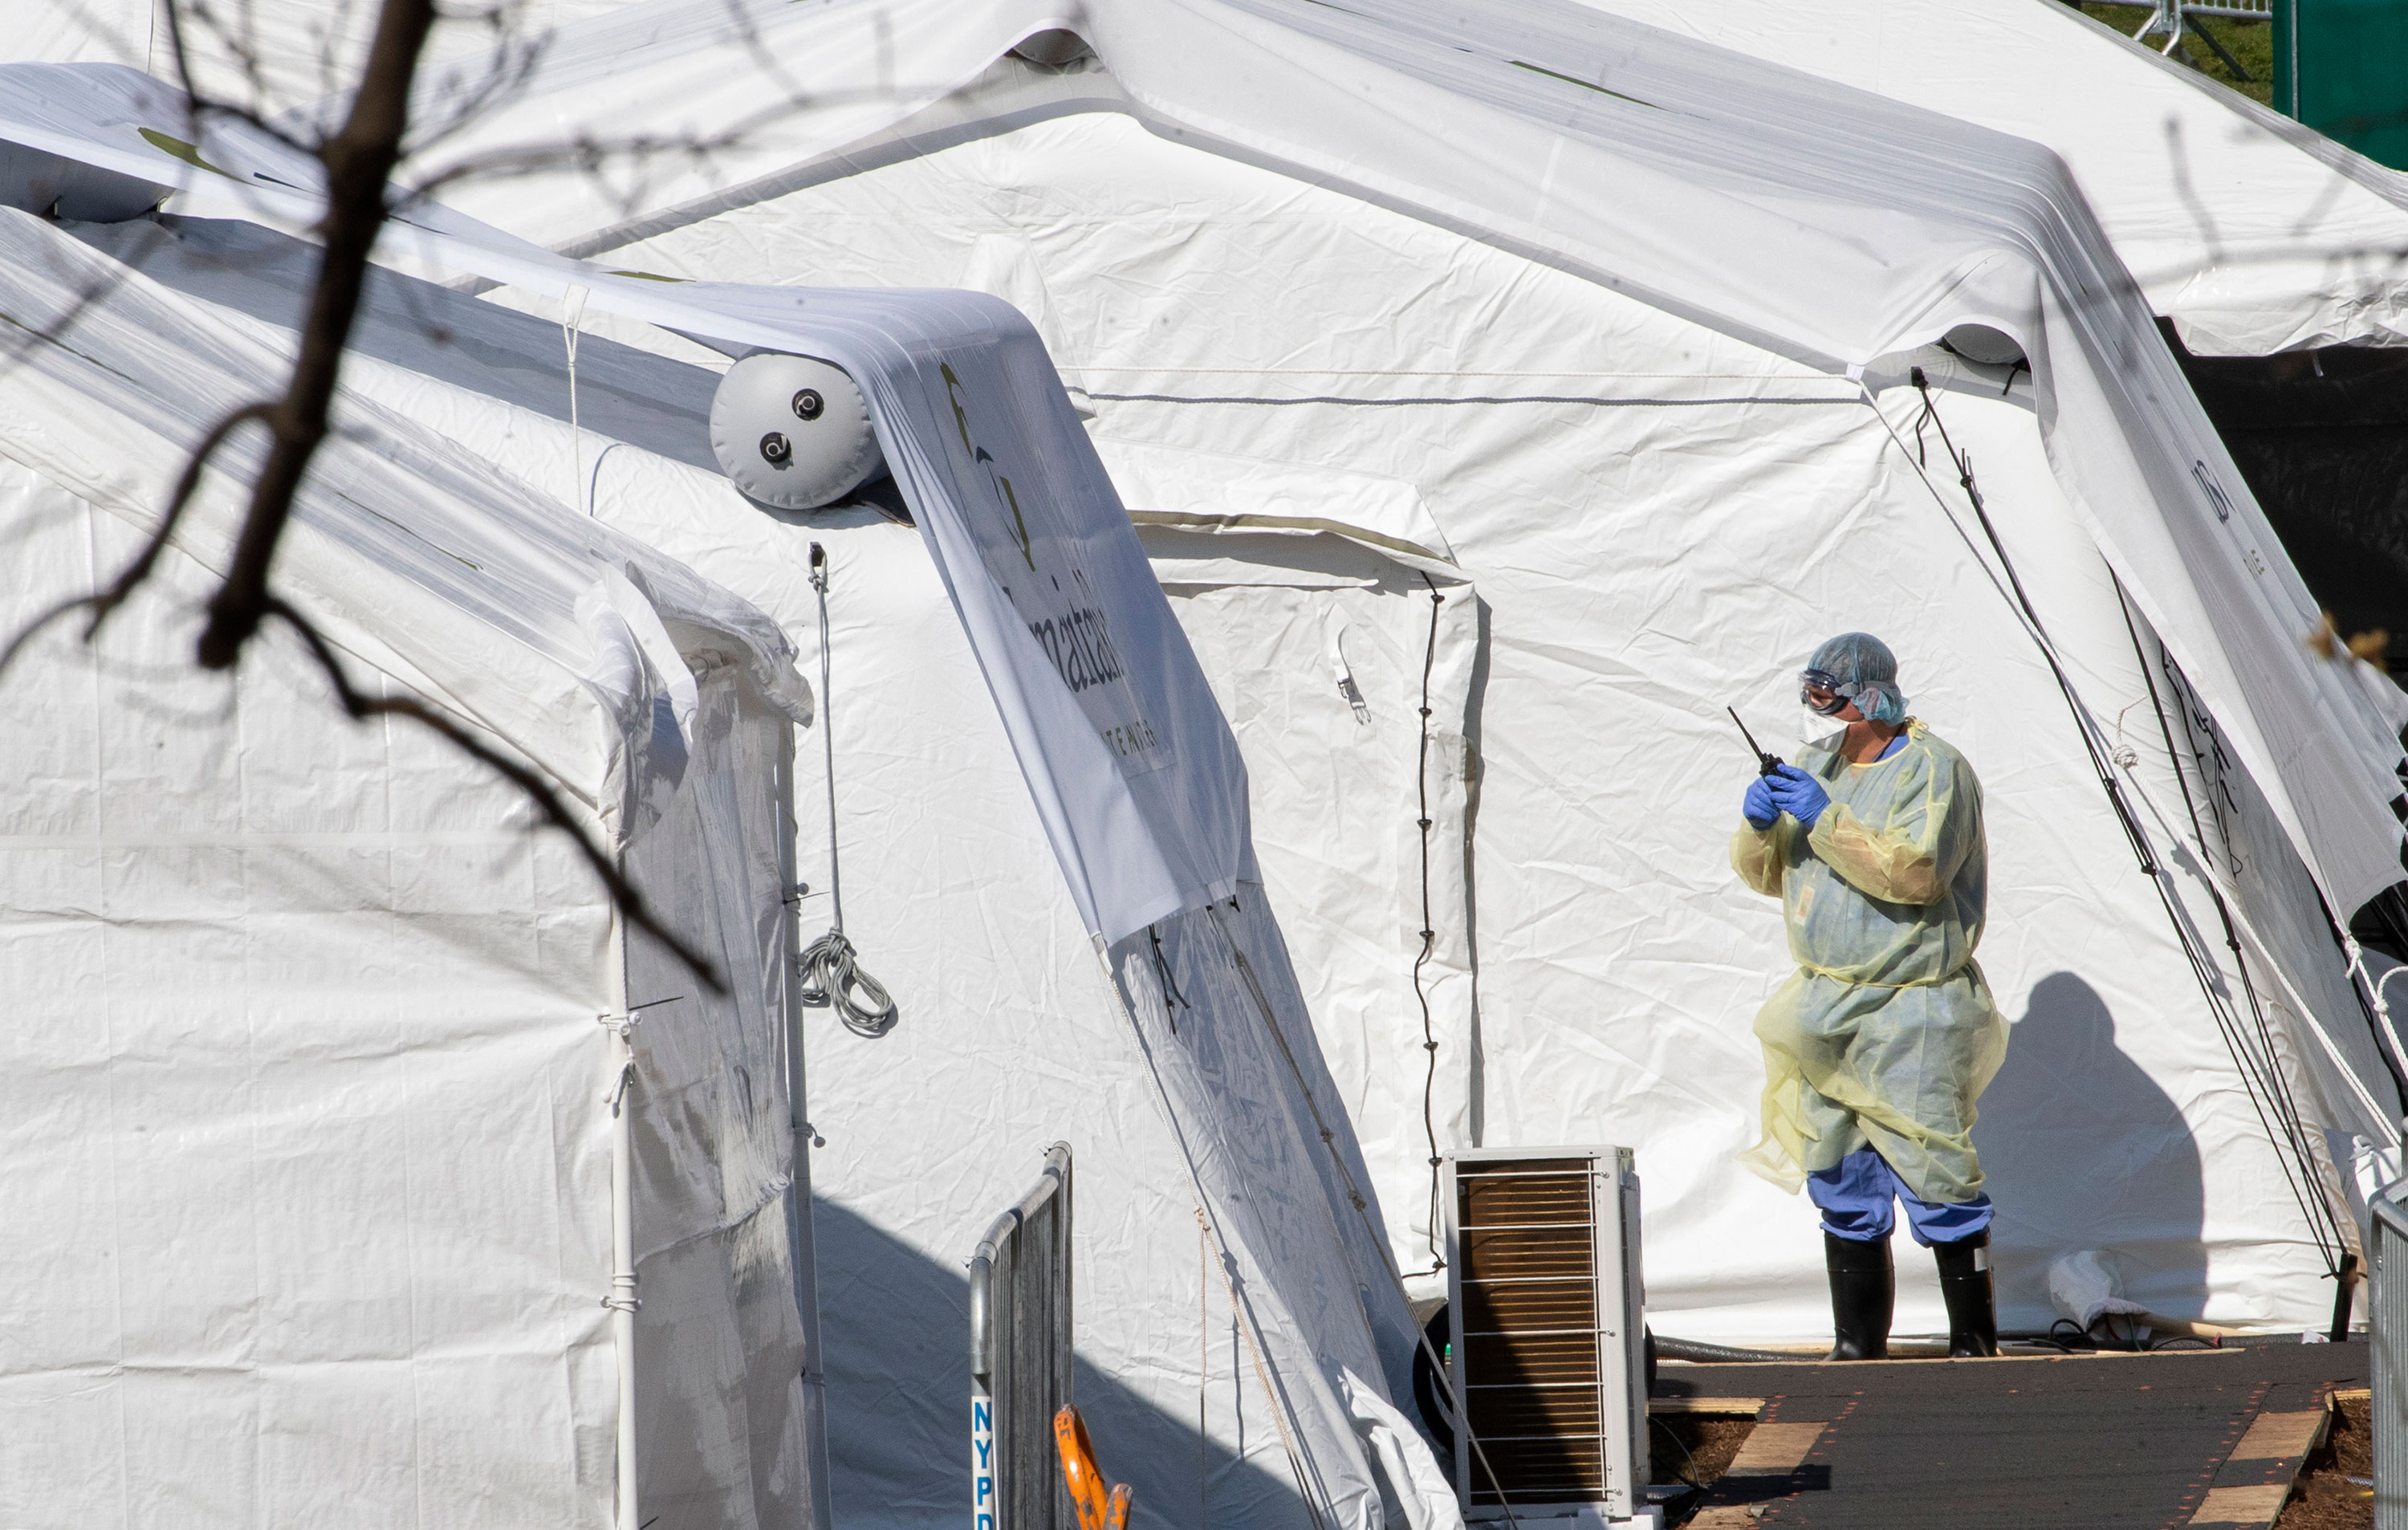 A medical staff member works at the Samaritan's Purse field hospital in New York's Central Park, on April 1.